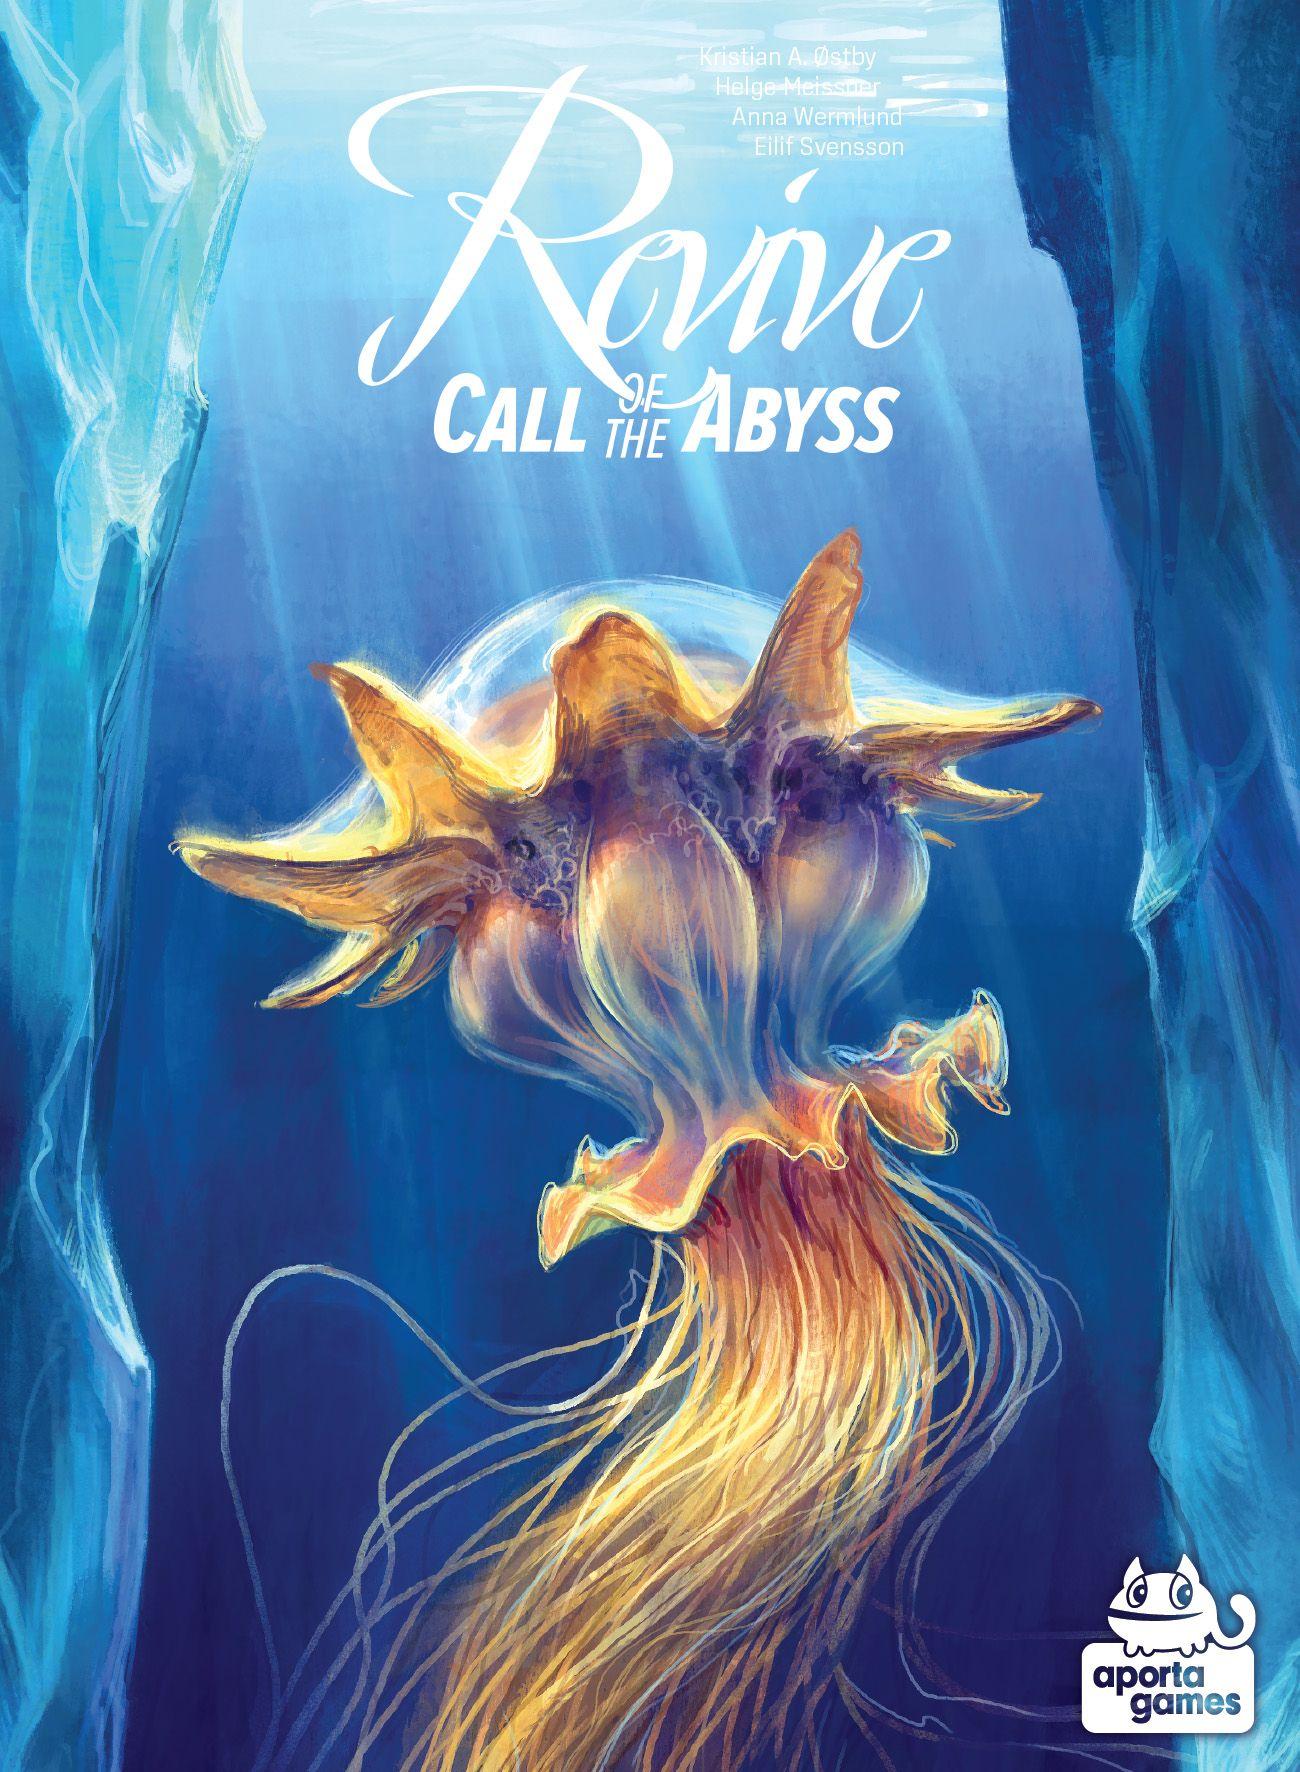 The new expansion of Revive "Call of the Abyss" is now playable with Mautoma